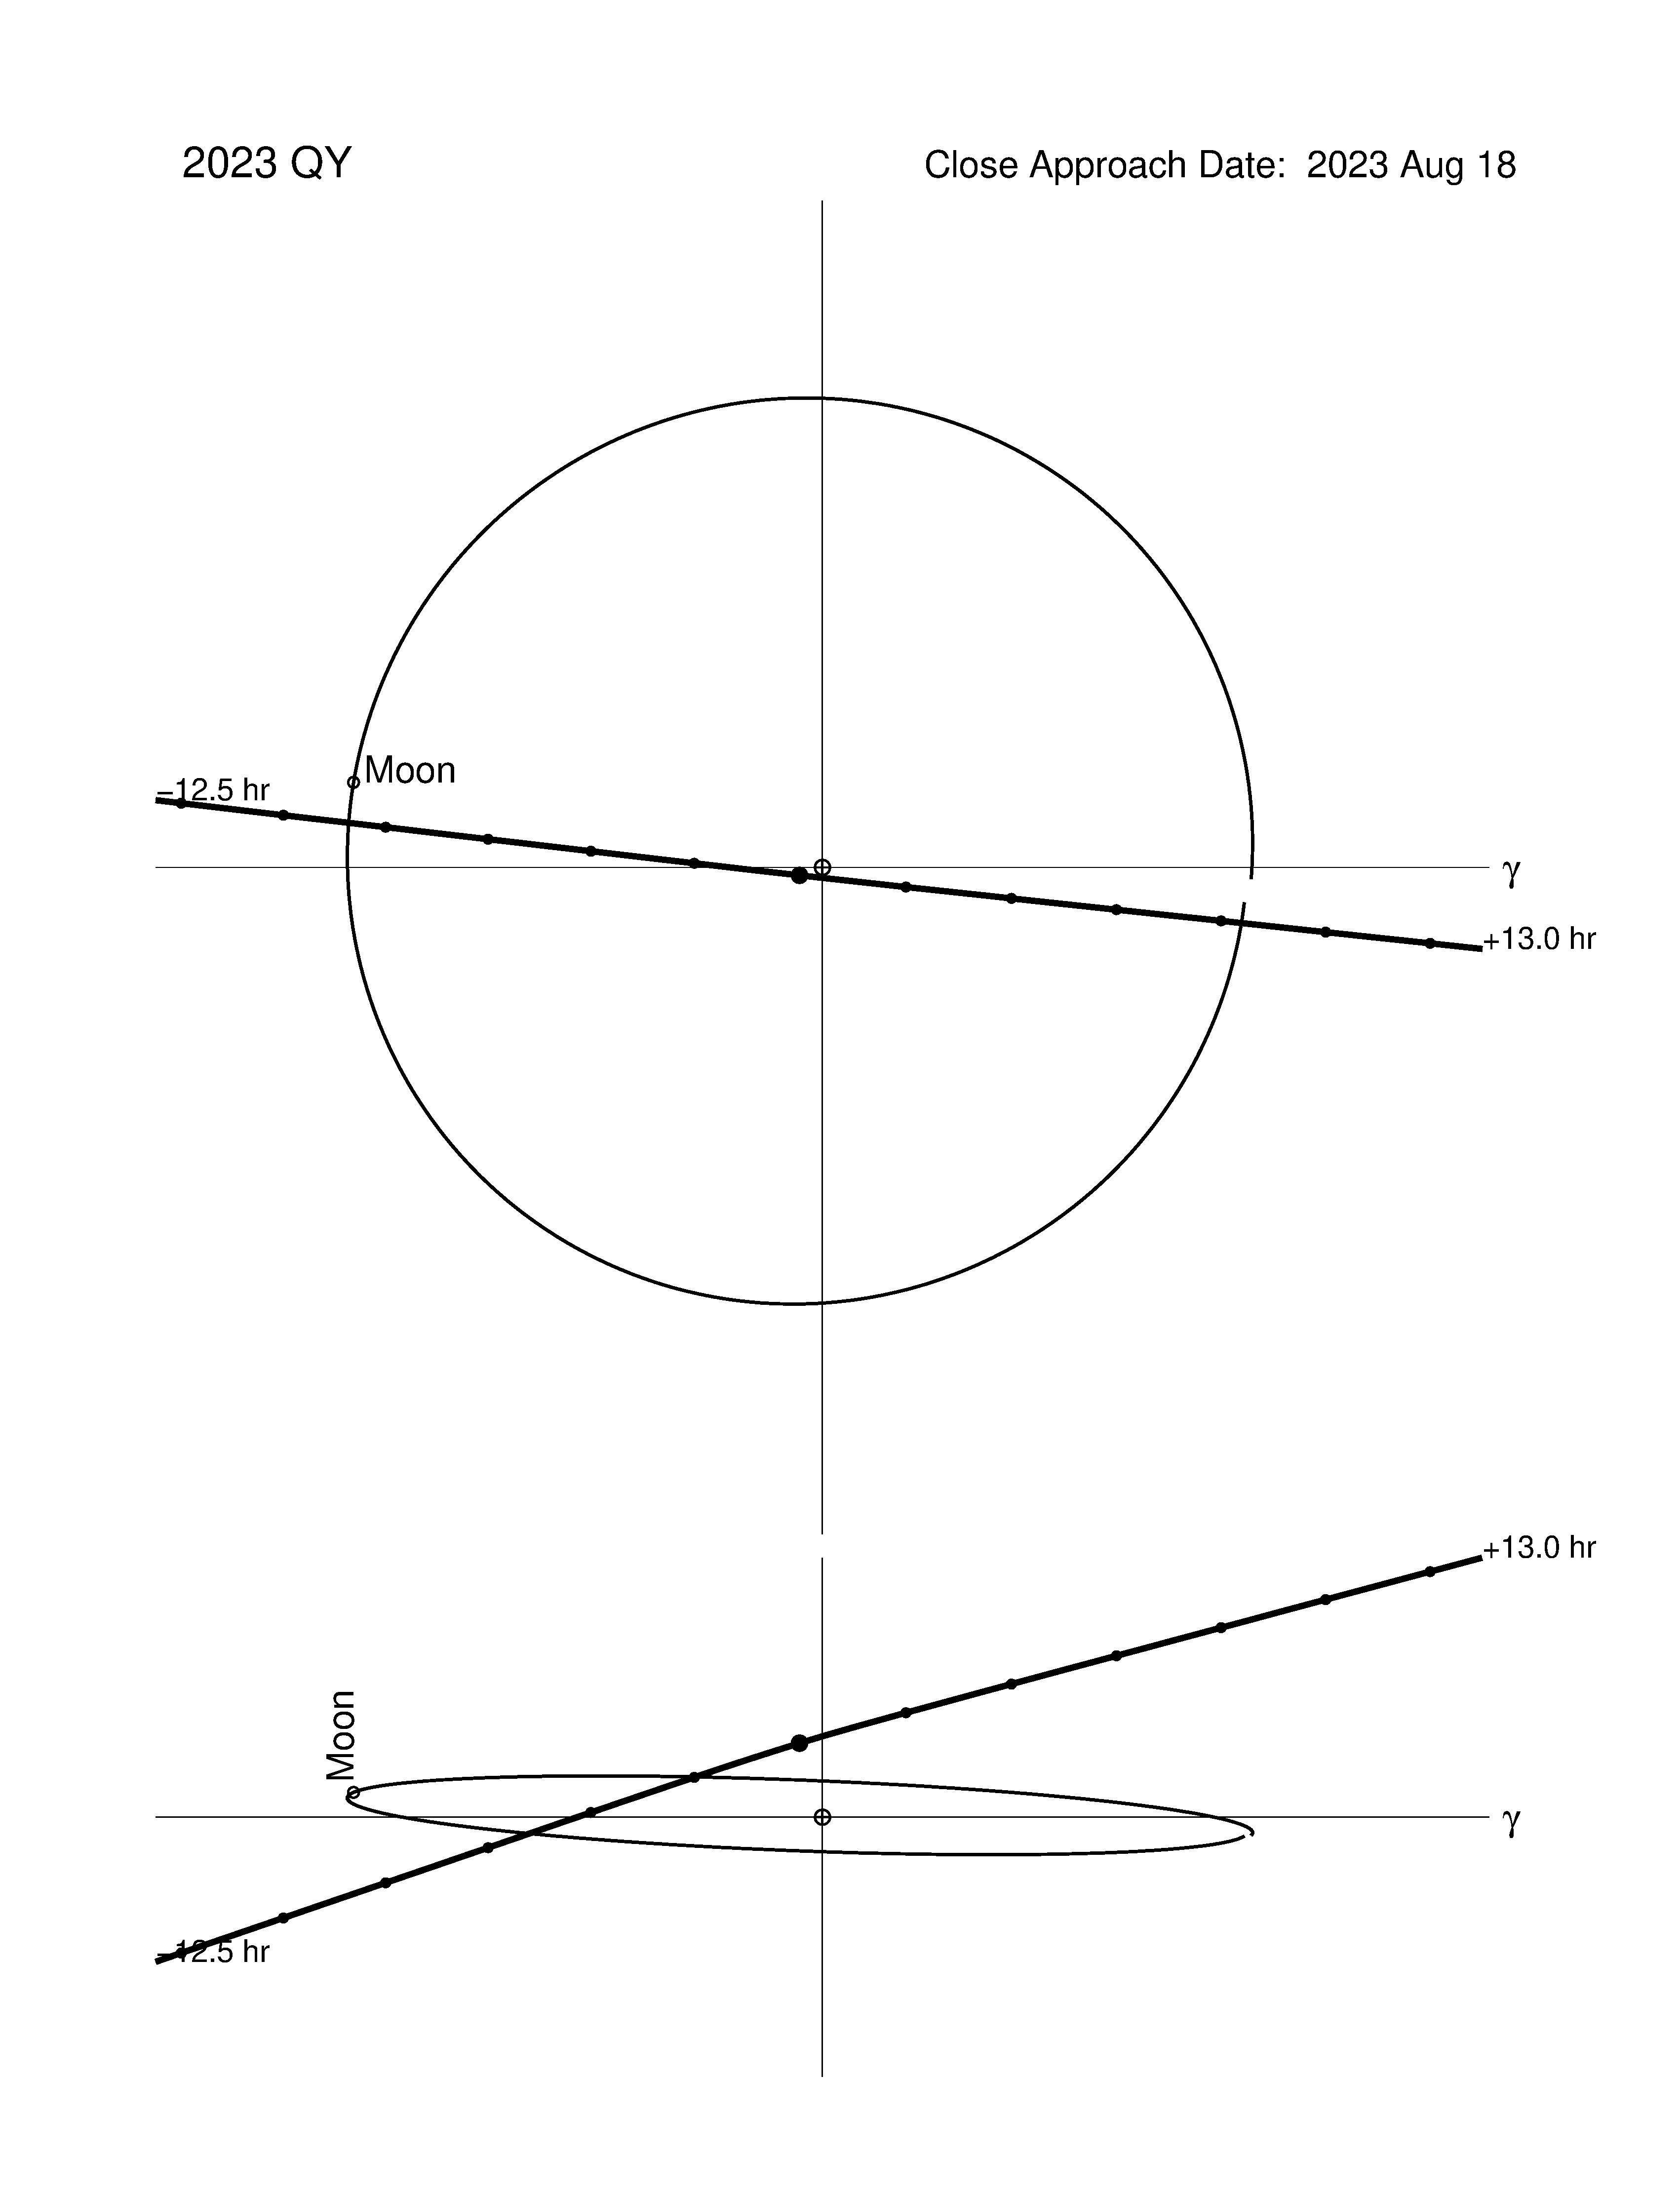 Near-Earth trajectory of 2023 QY